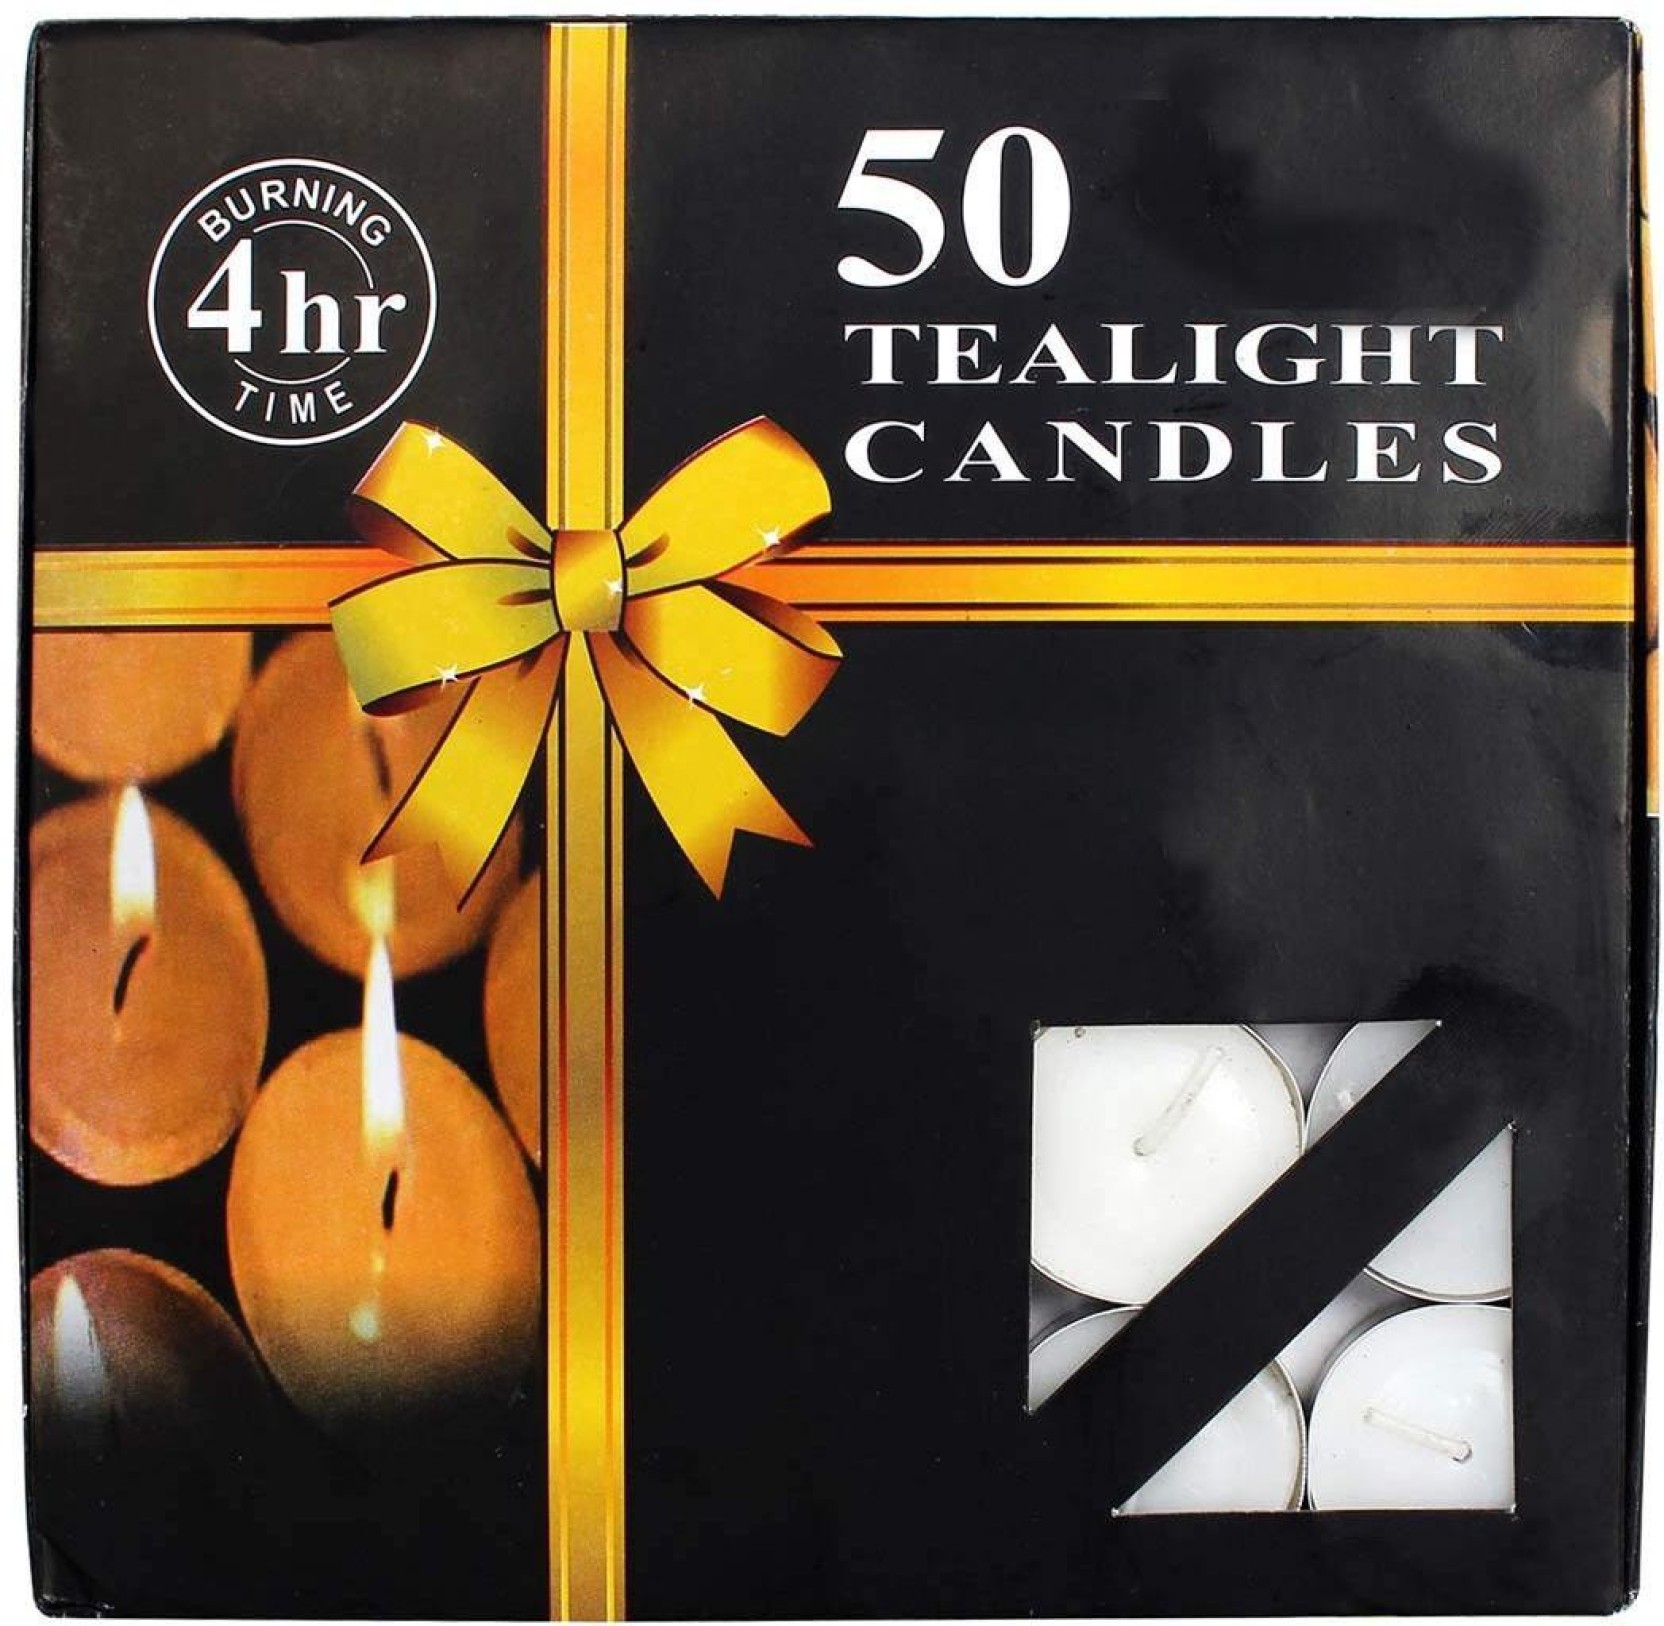 4 Hour Burn Time Dripless World of Candles White Tea Light Candles 50 Pack Unscented Decorative Gold Tin Holders Smokeless